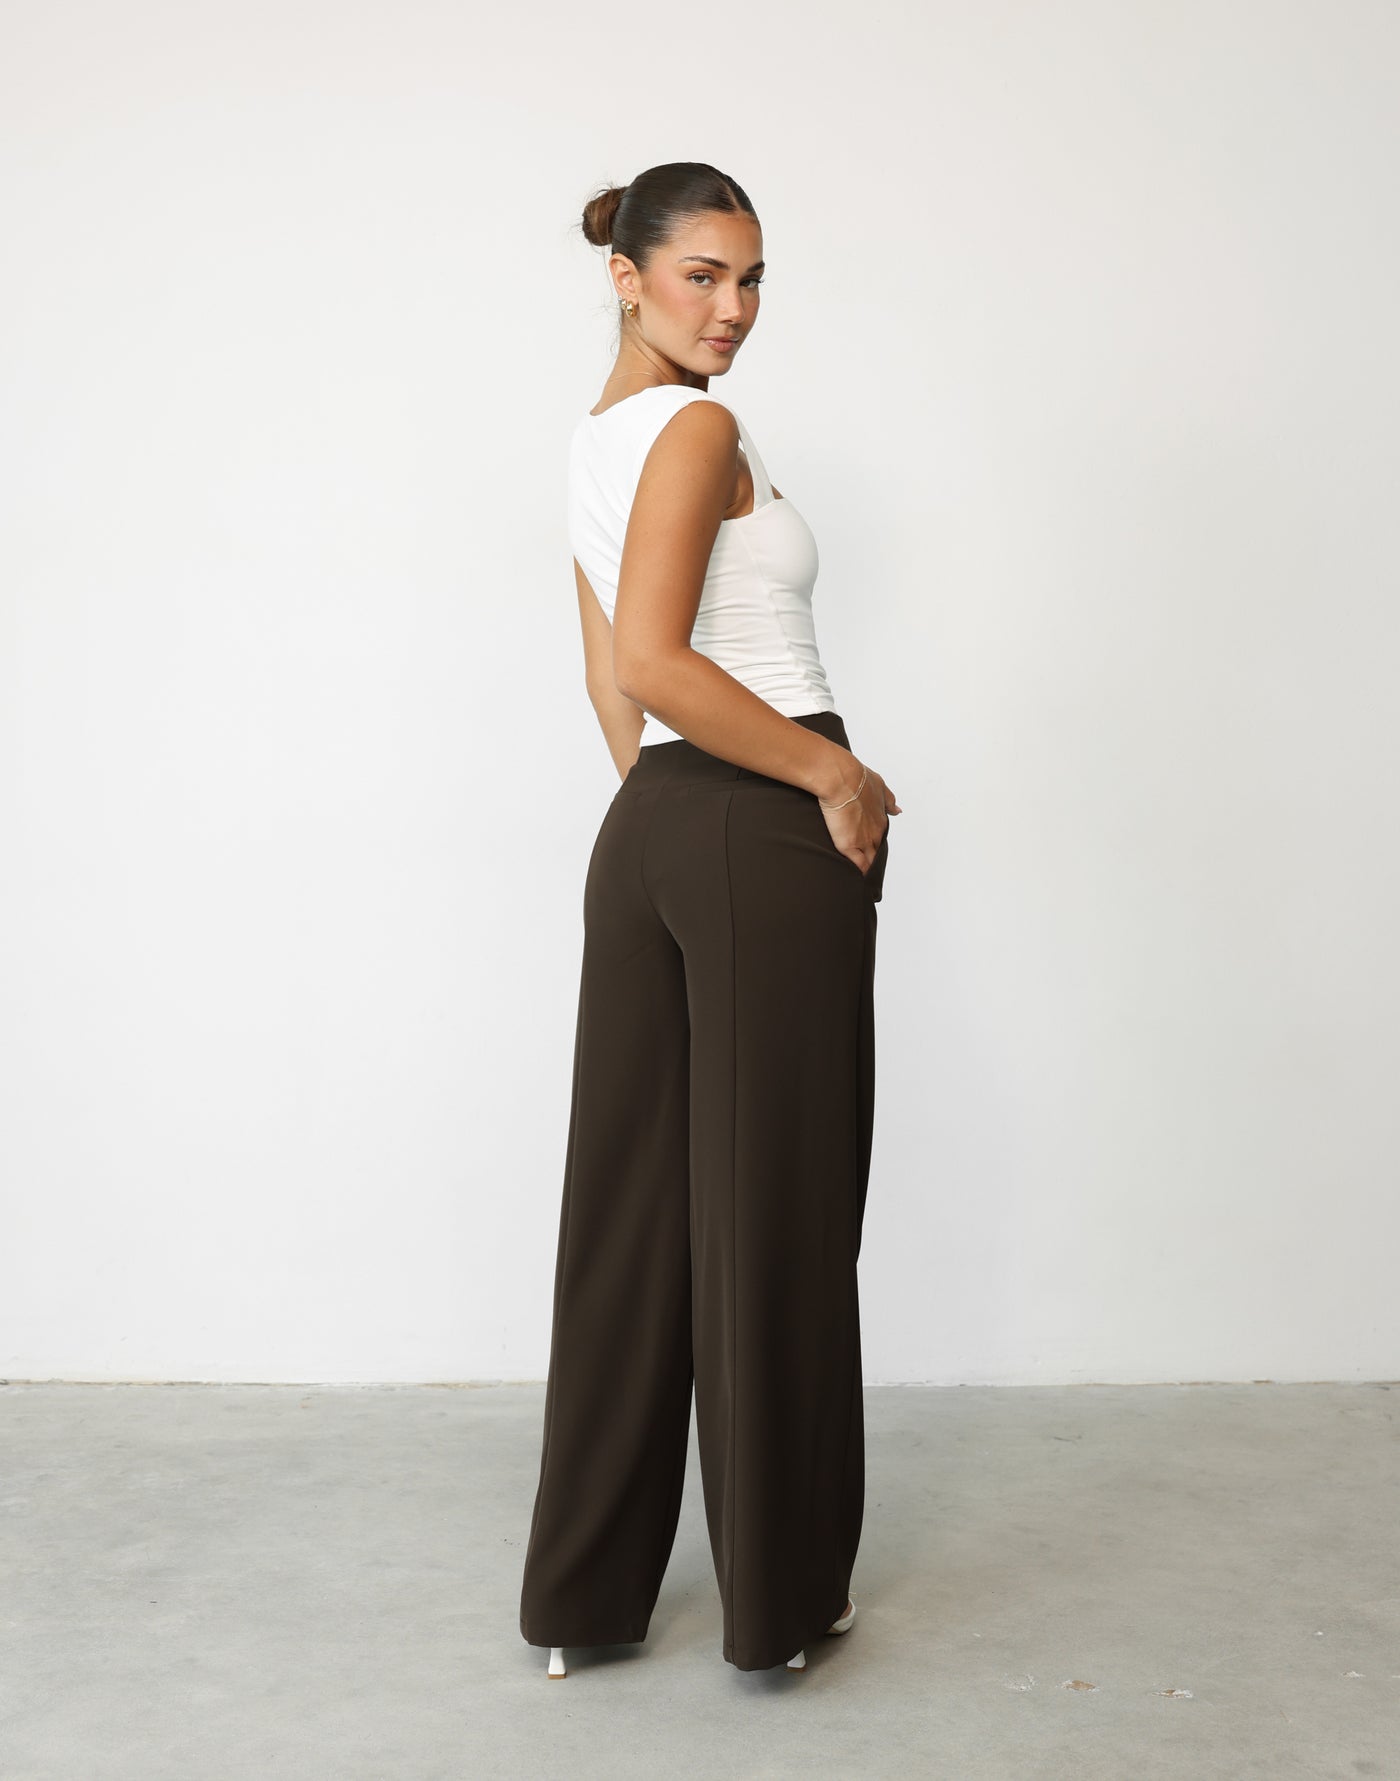 Alexander Pants (Dark Coffee) | CHARCOAL Exclusive - High Waisted Wide Leg Pants - Women's Pants - Charcoal Clothing